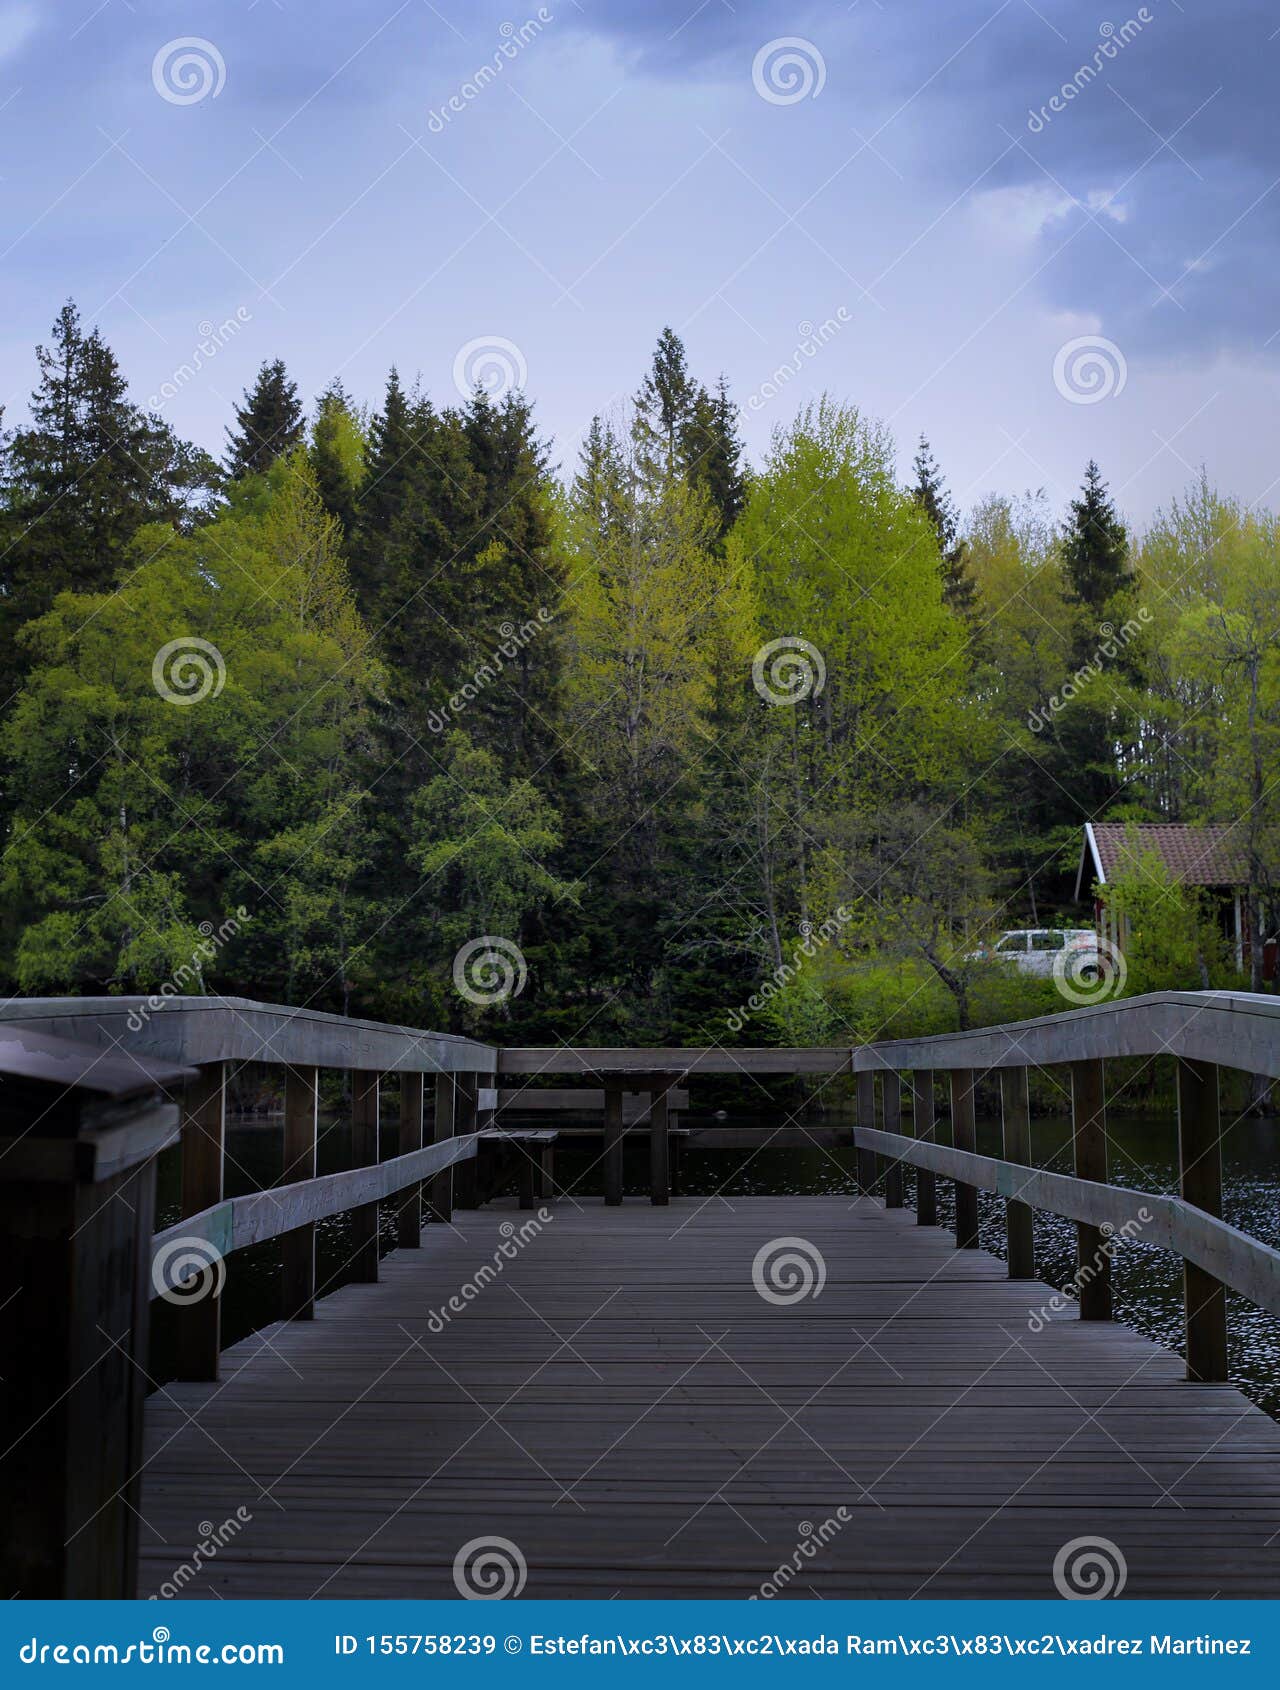 photography of  wooden bridge in the forest